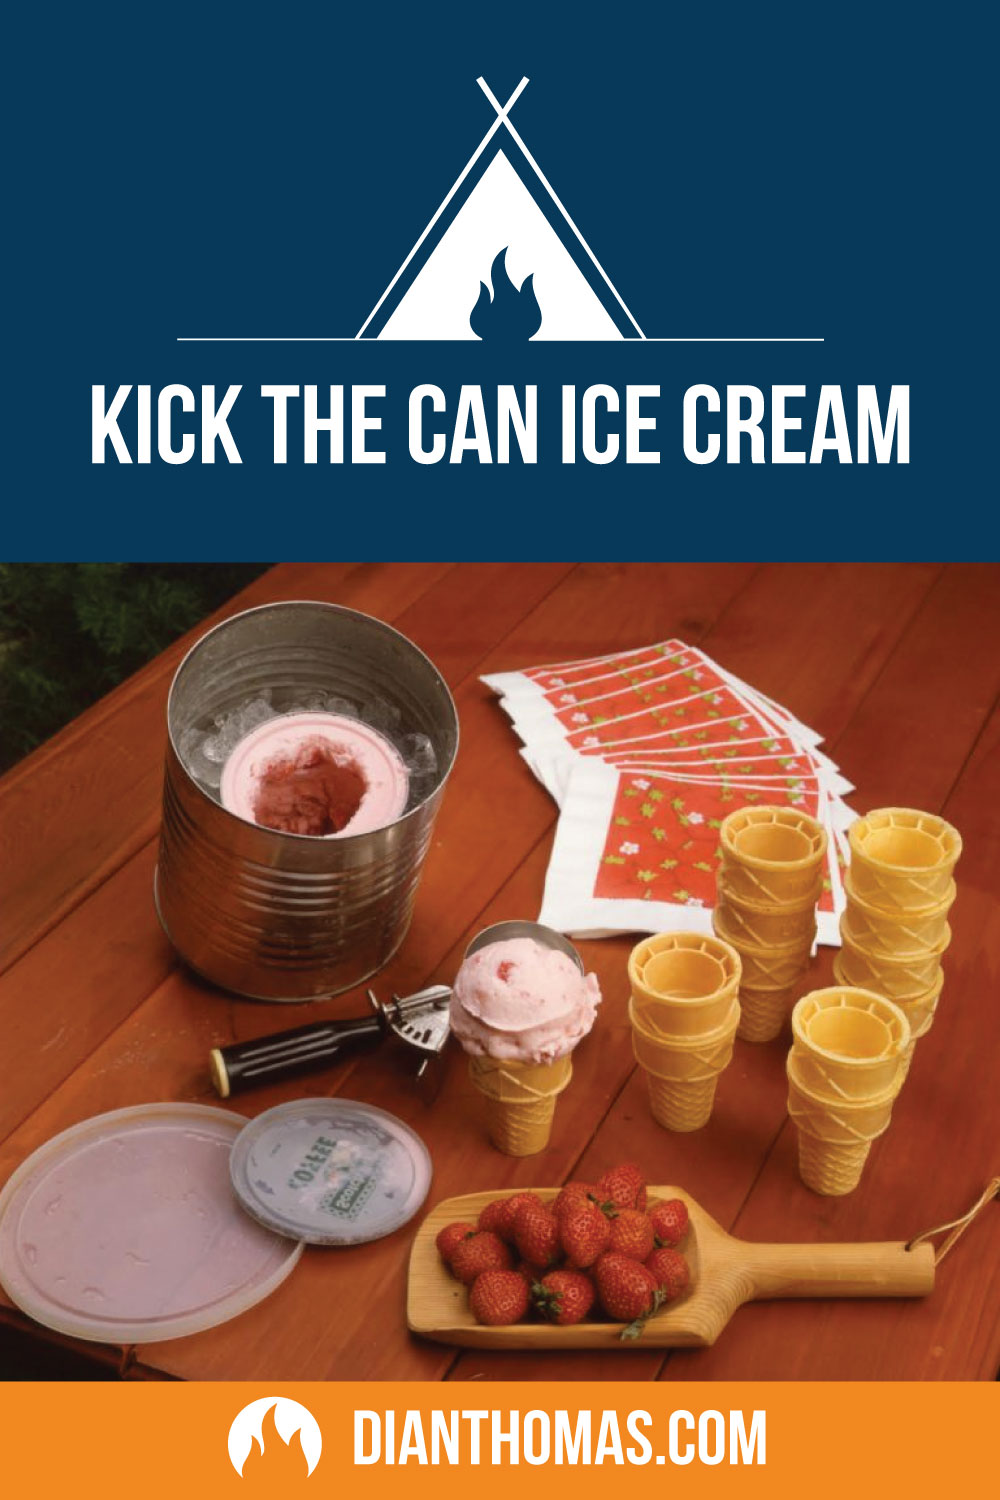 With summer around the corner this delicious DIY ice cream treat will make a perfect snack your kids will love!